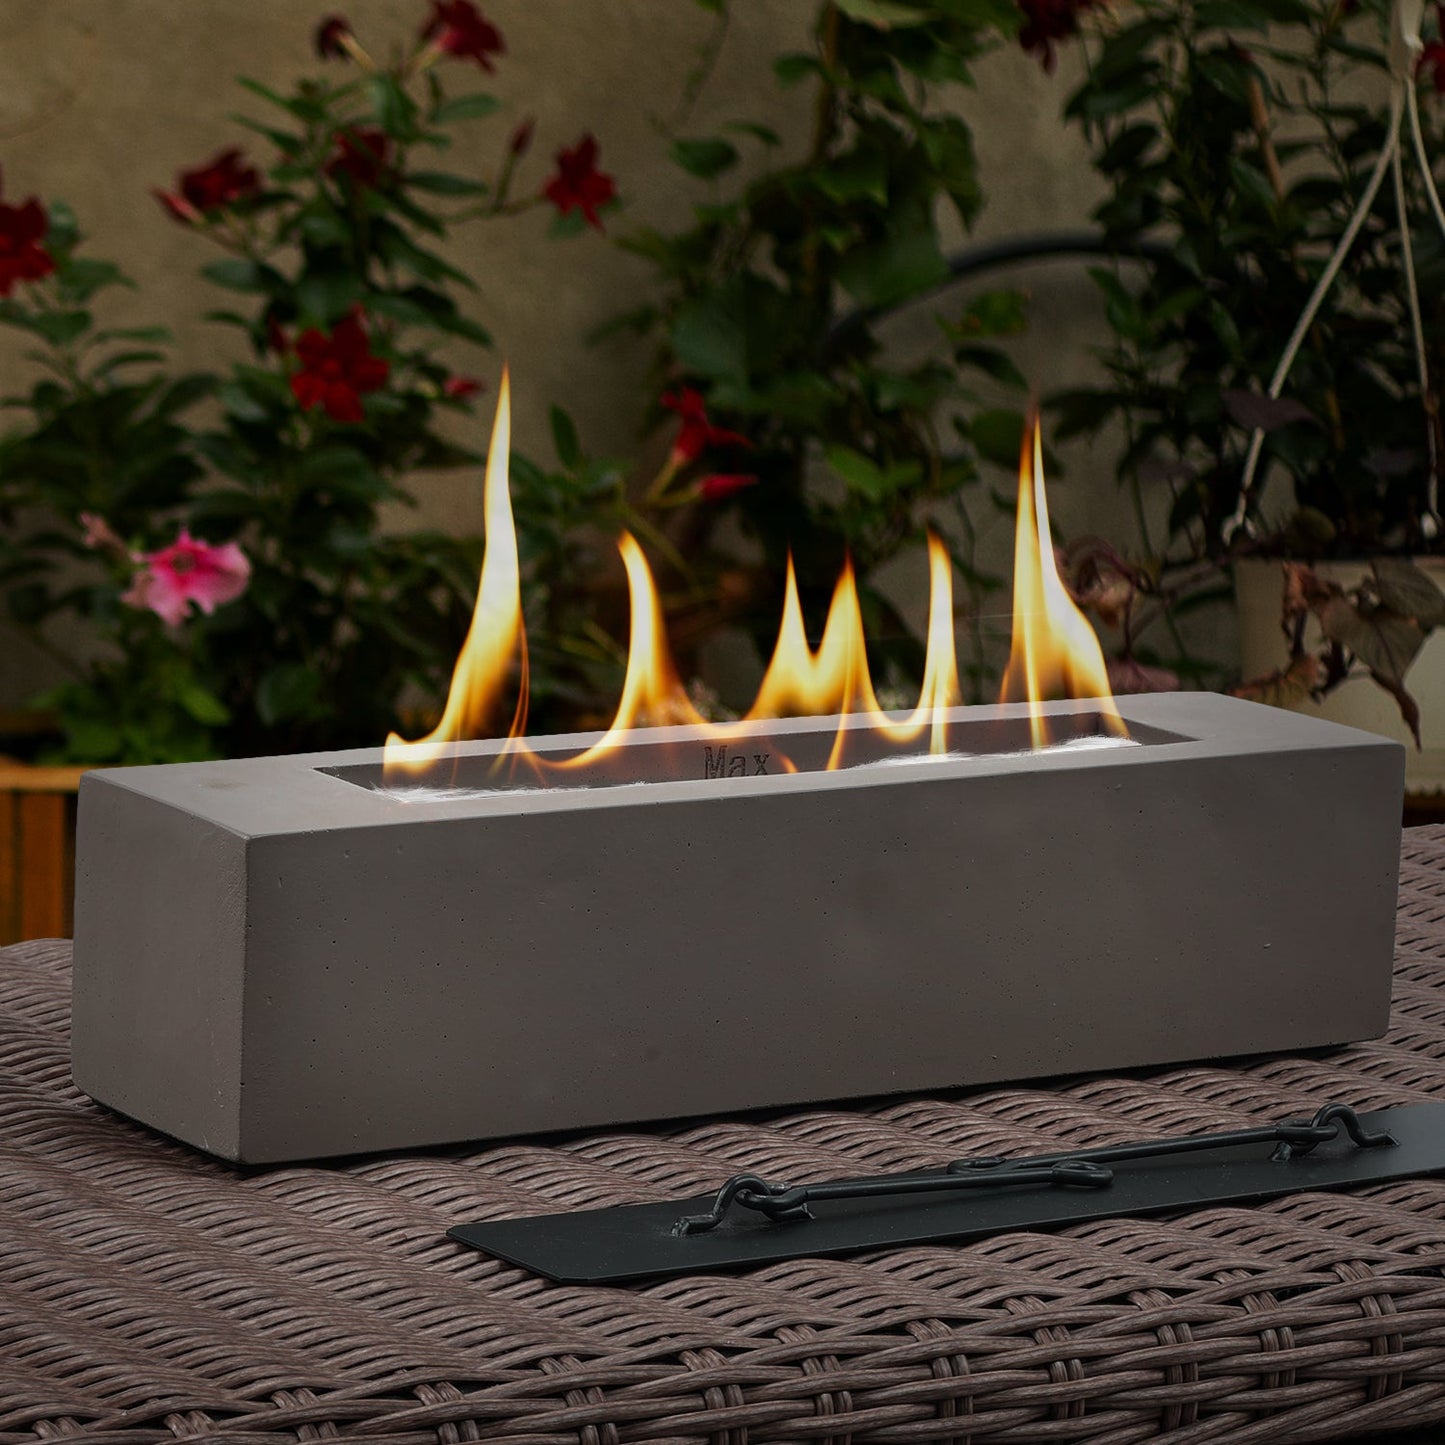 Portable Tabletop Fire Pit - Indoor/Outdoor Mini Fireplace for Balcony, Patio Decor Tool Aoodor LLC   